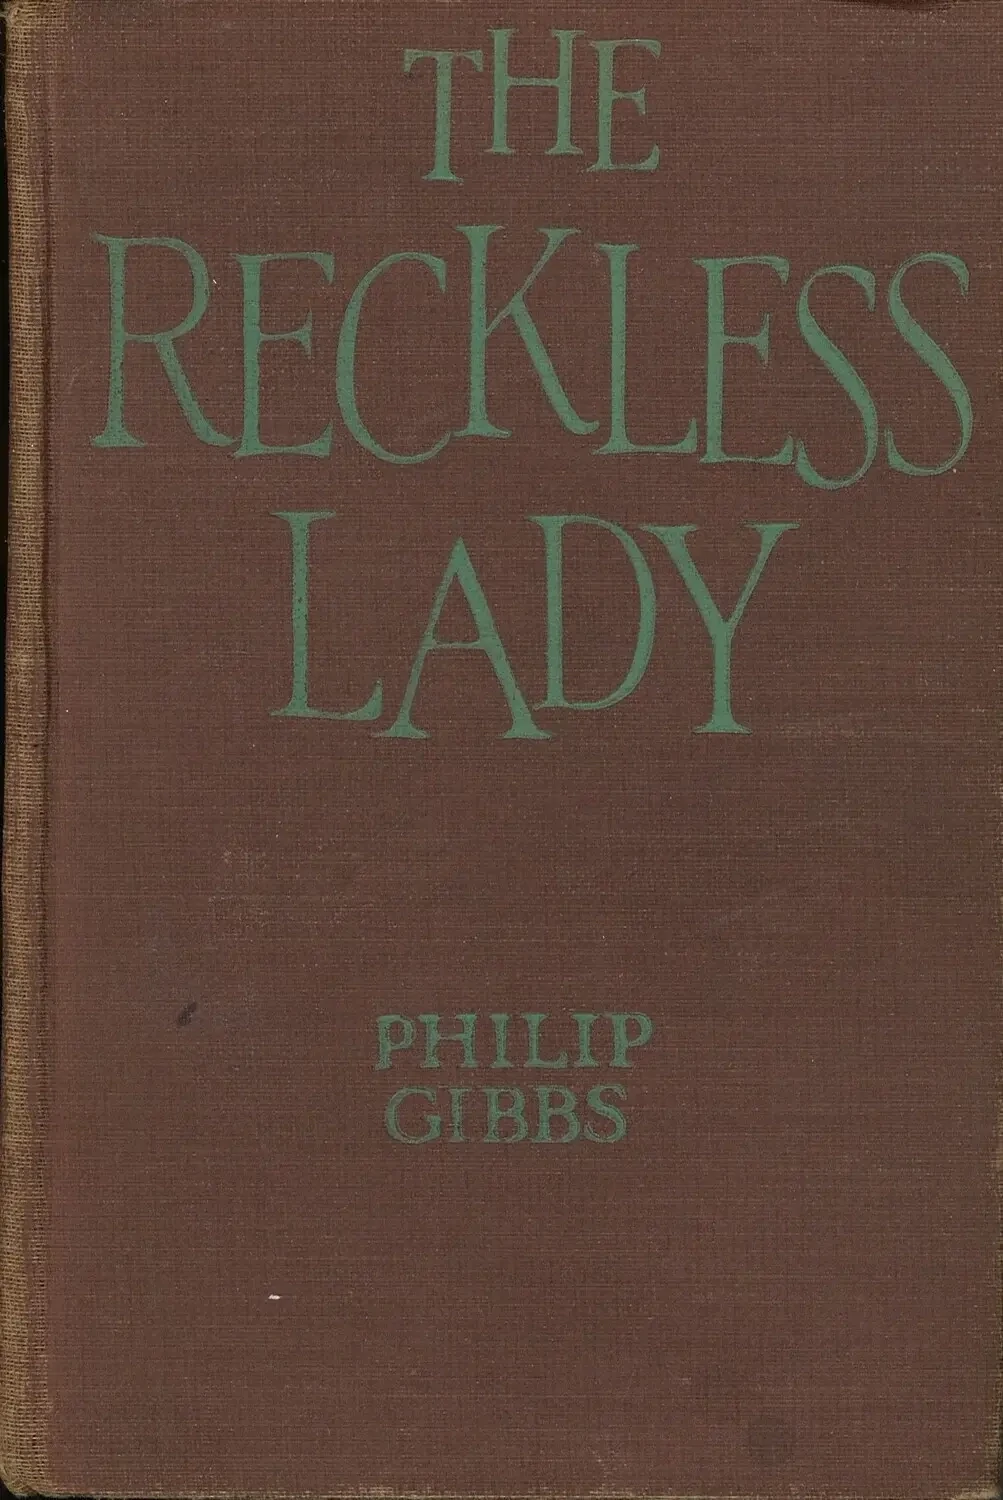 The Reckless Lady by Philip Gibbs